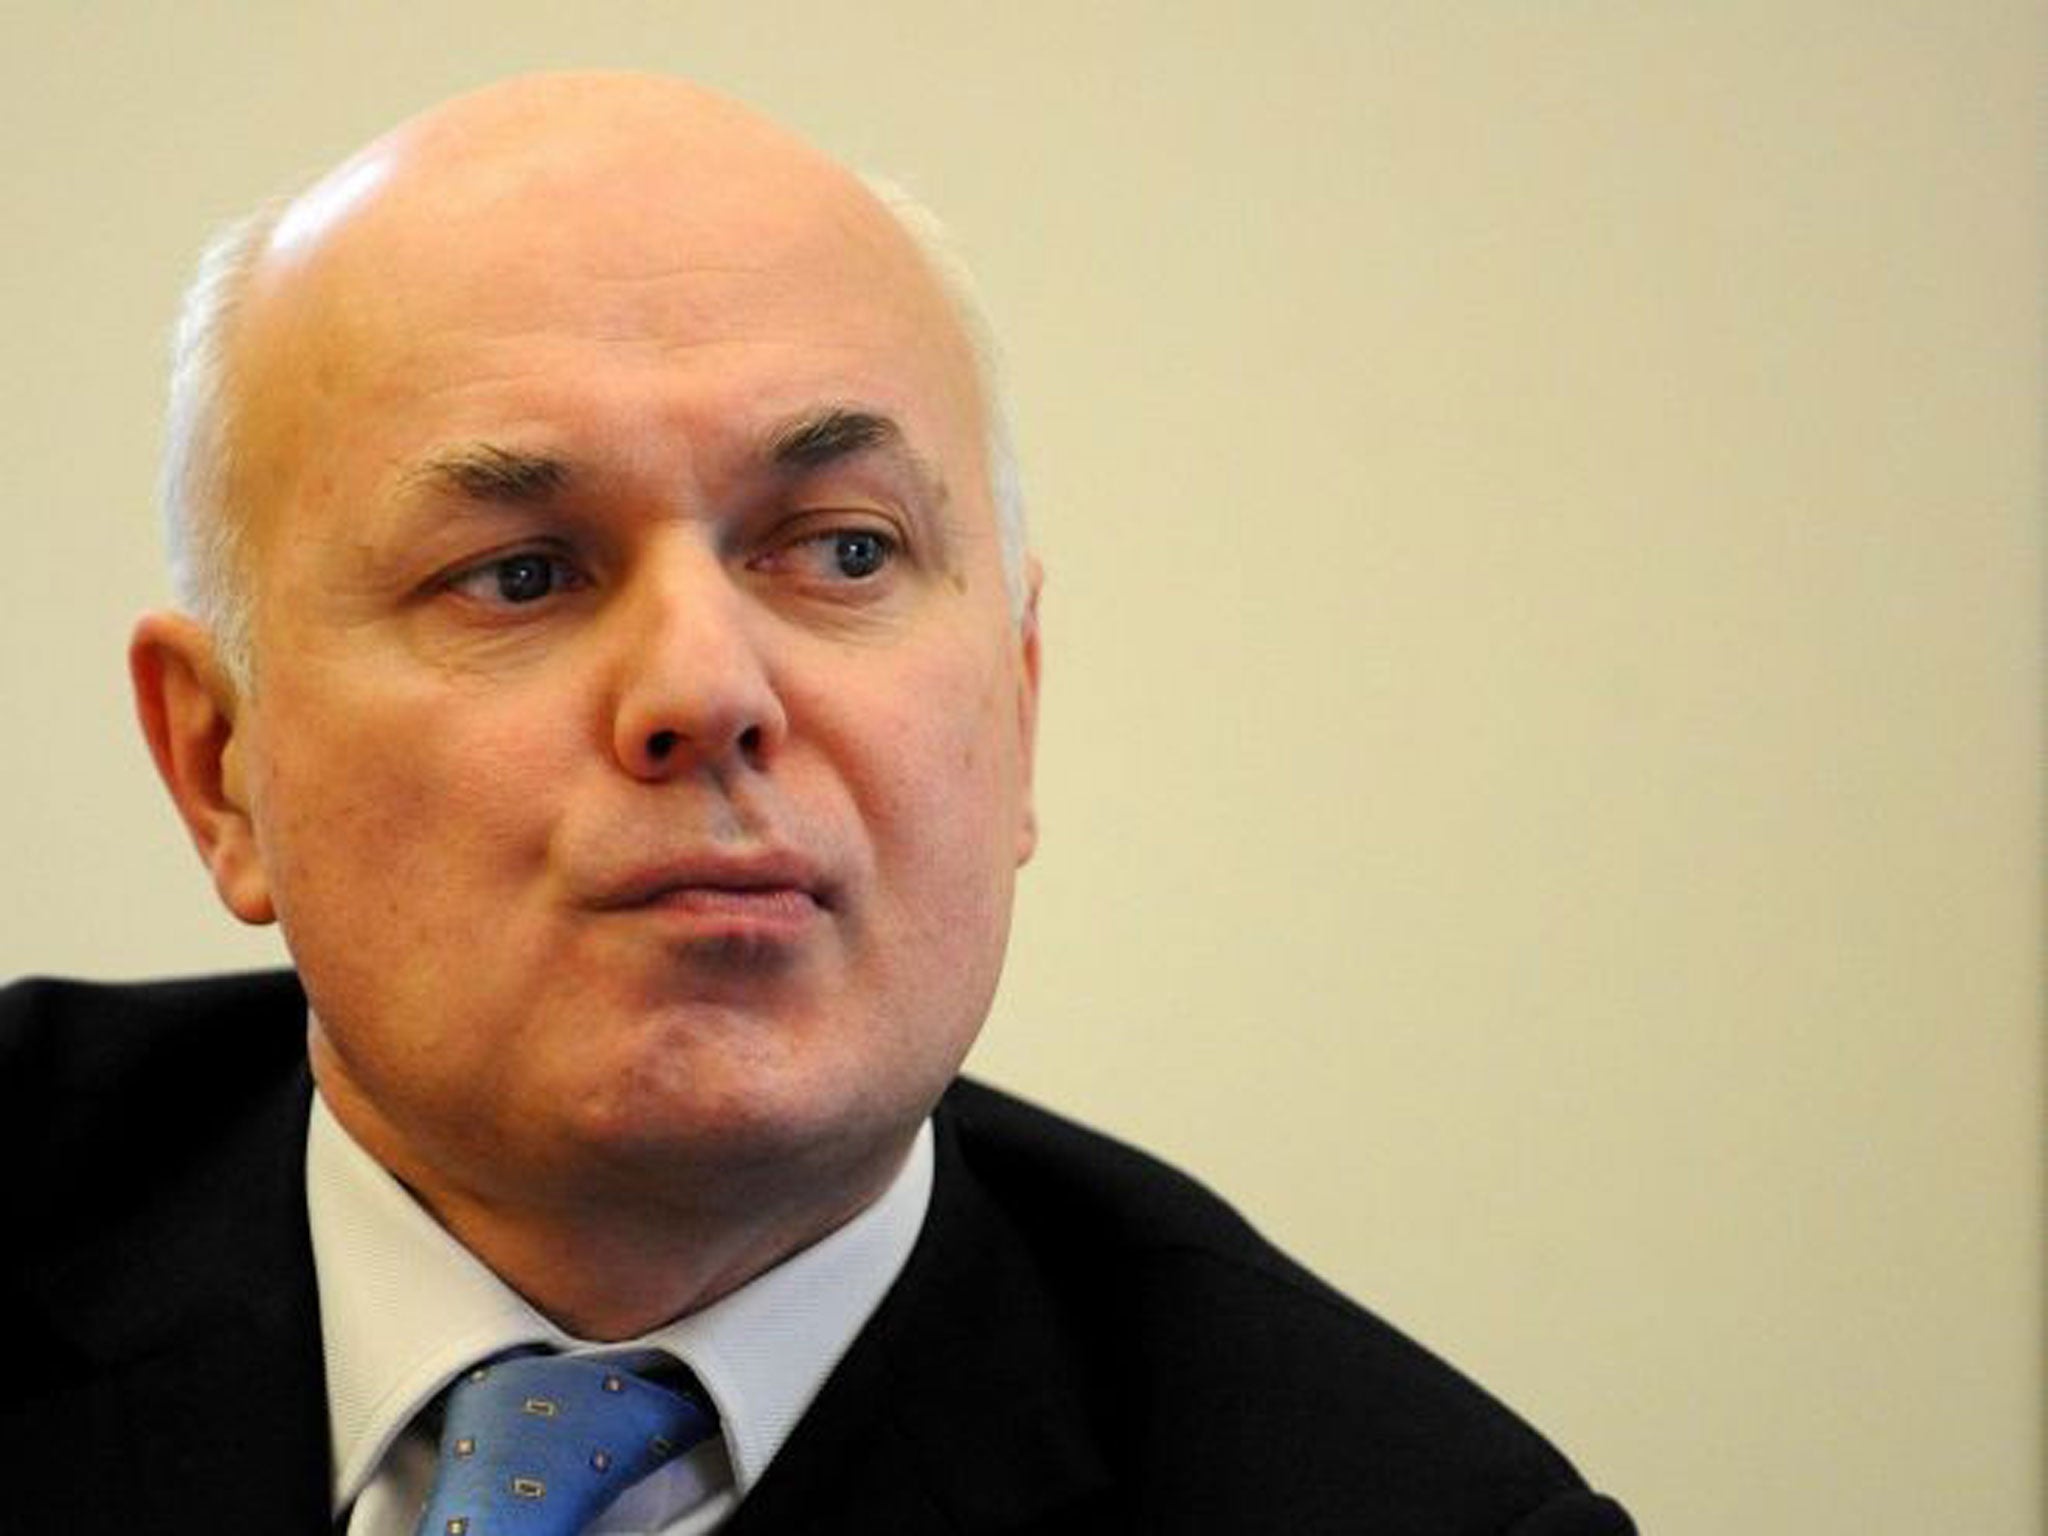 Iain Duncan Smith accused the BBC of political bias today